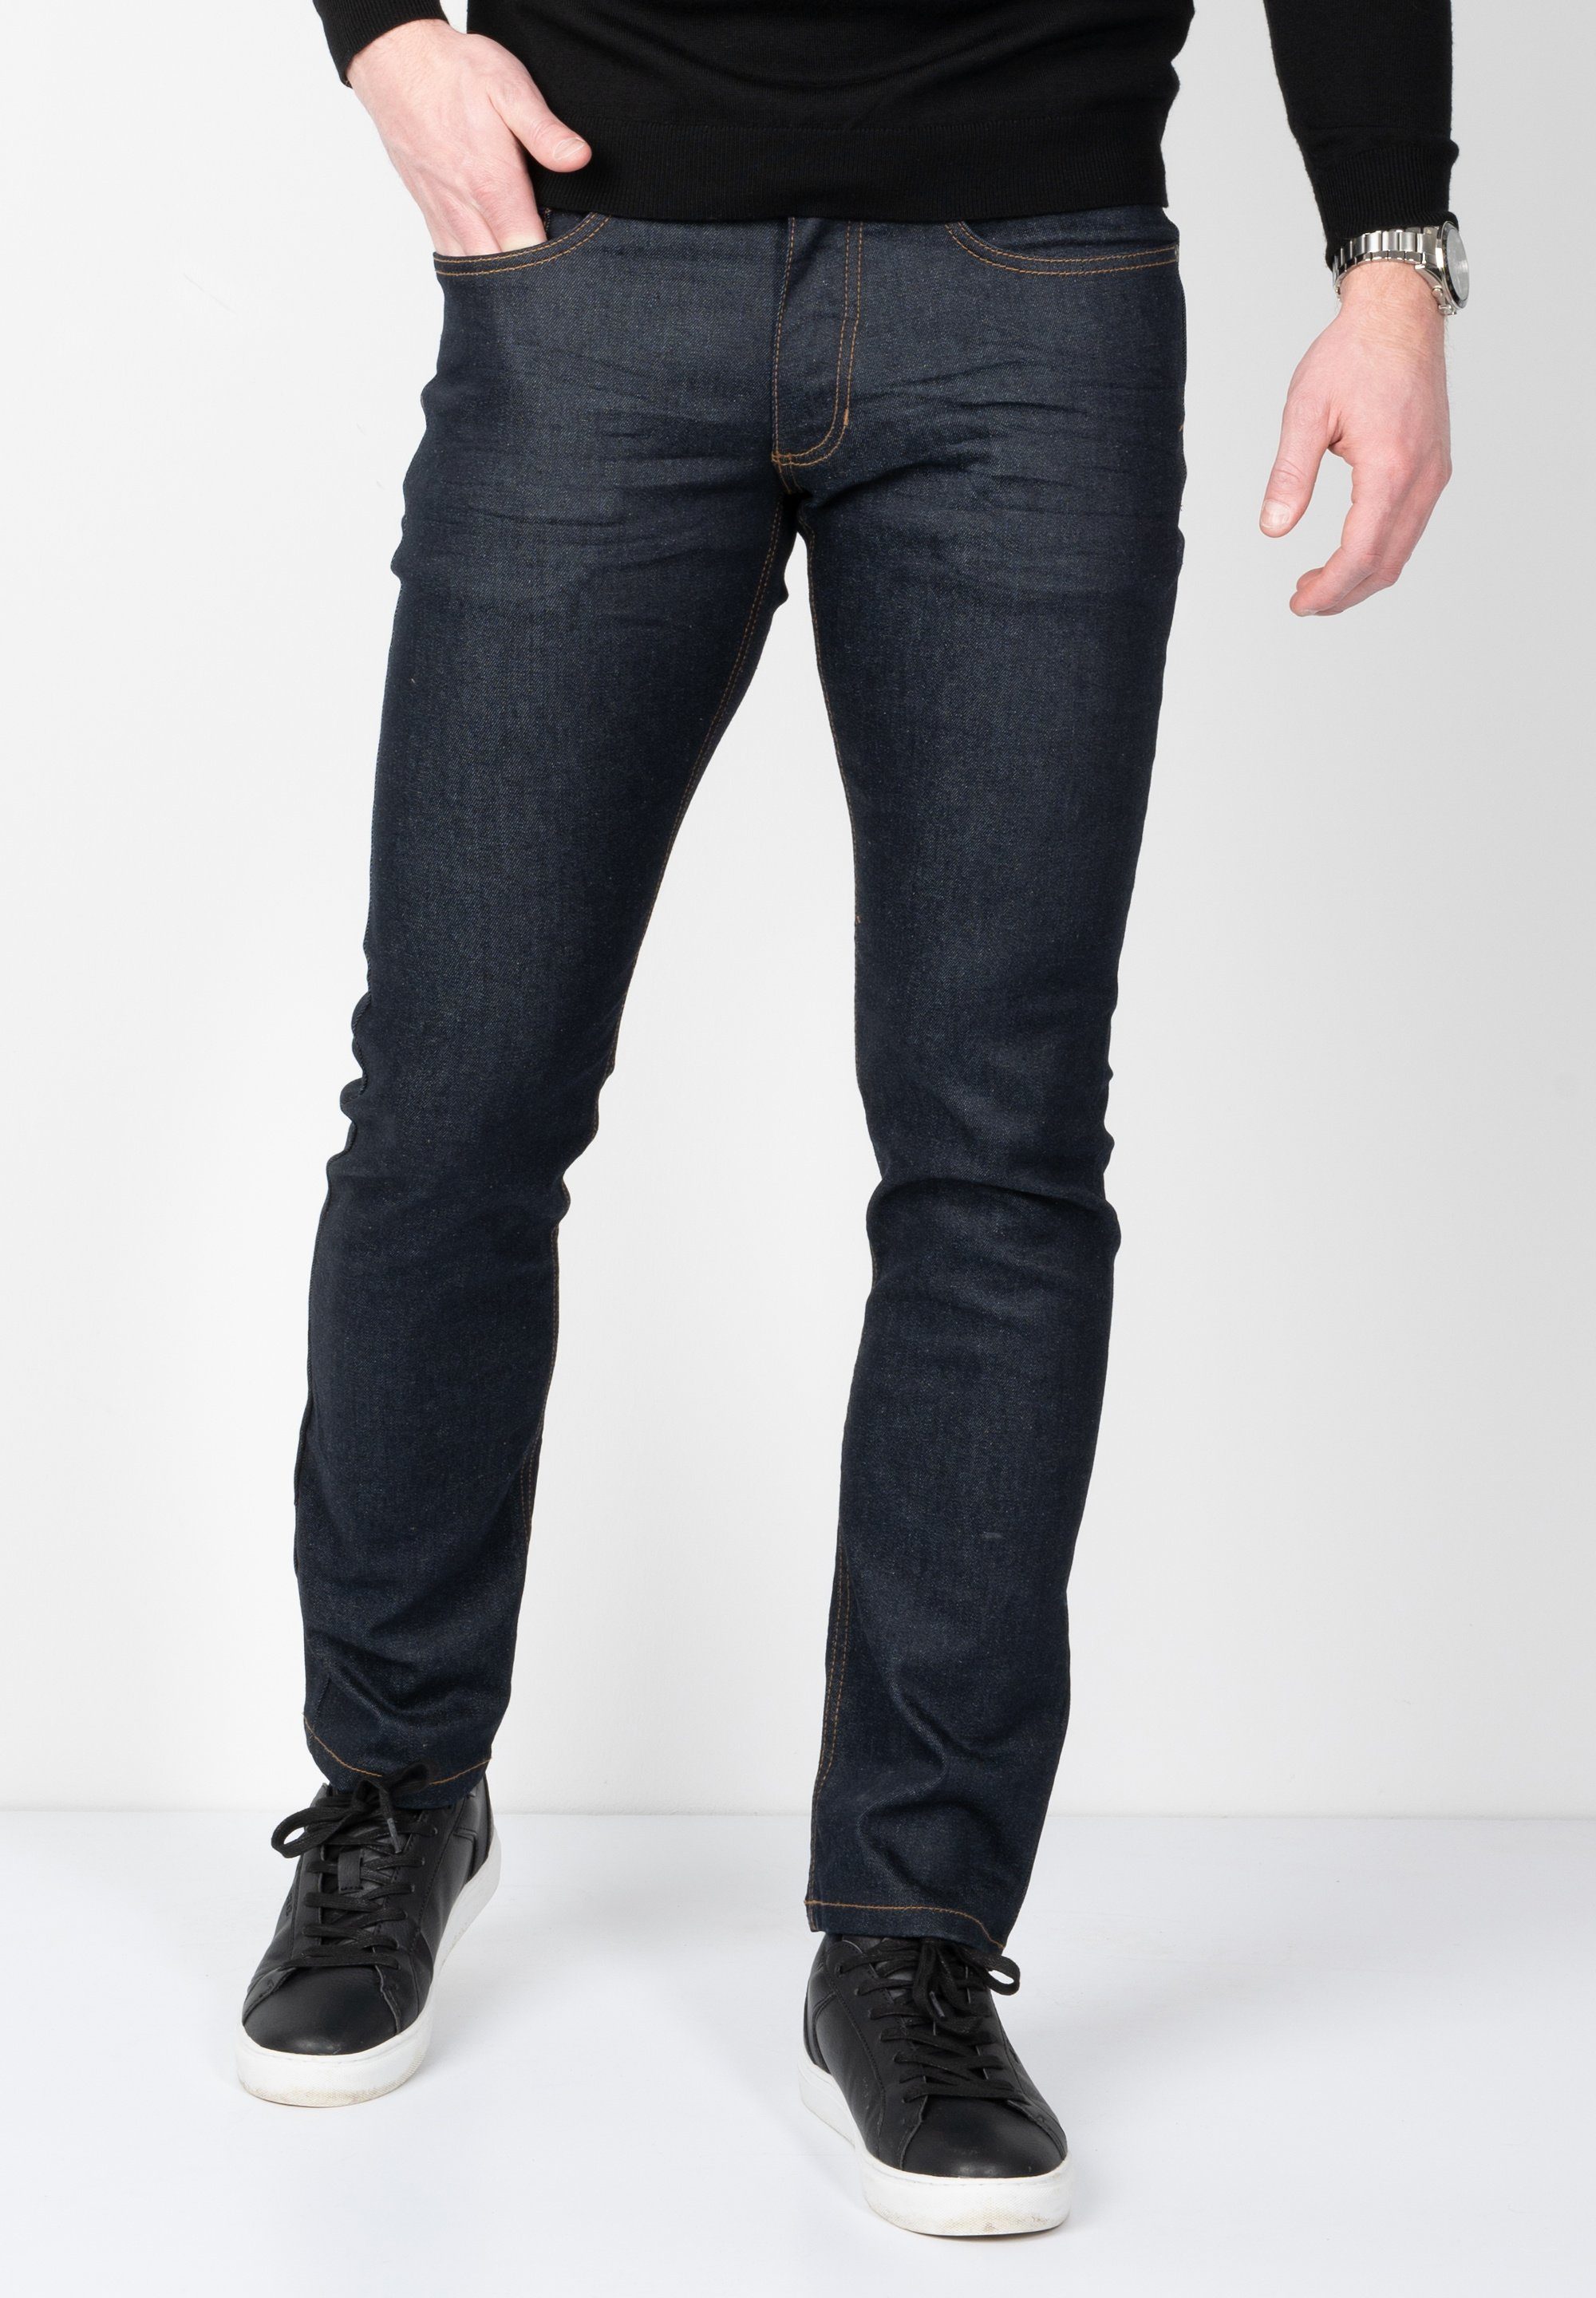 SUNWILL Straight-Jeans Super Stretch in Fitted Fit blue dark